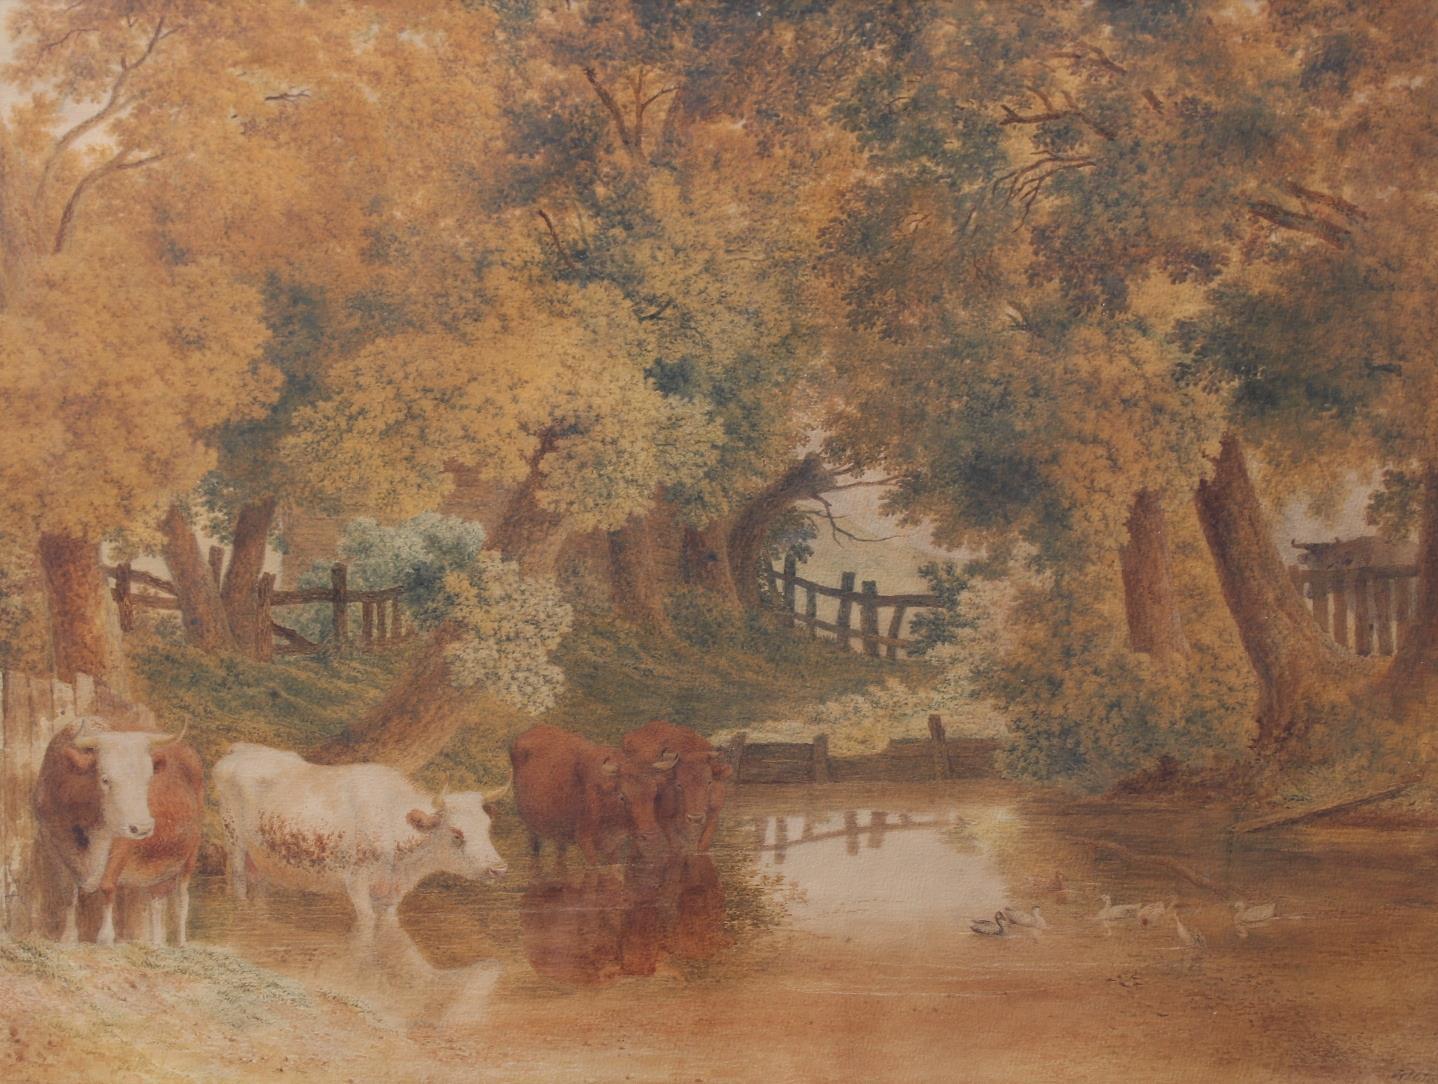 ROBERT HILLS (1799-1864) CATTLE WATERING AT A SHADY COUNTRY POOL Signed and dated indistinctly (1821